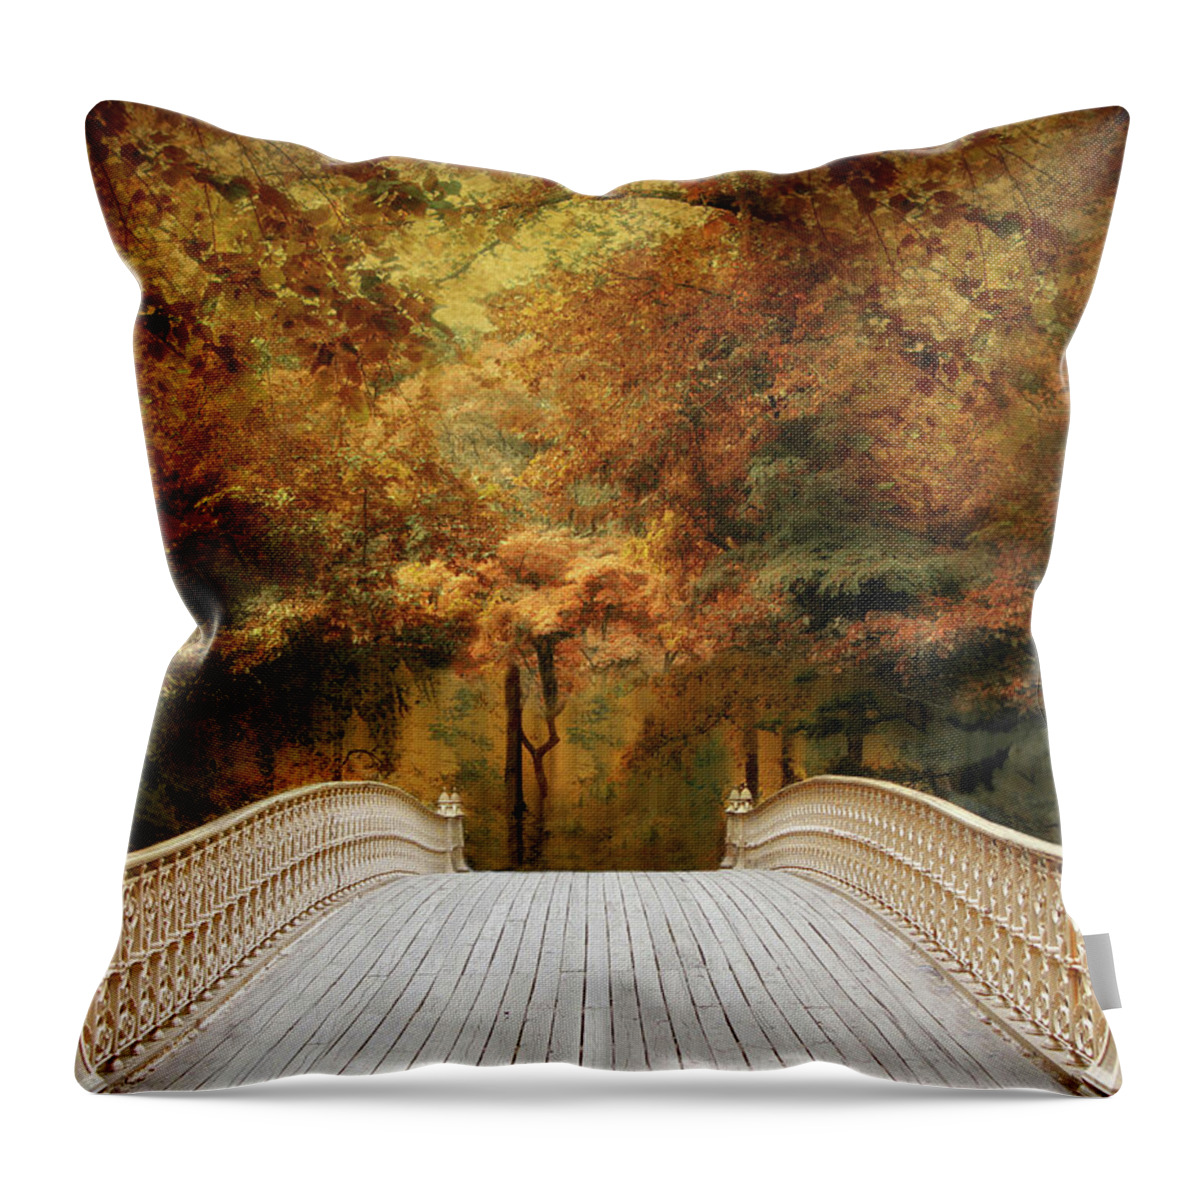 New York Throw Pillow featuring the photograph Pine Bank Autumn by Jessica Jenney